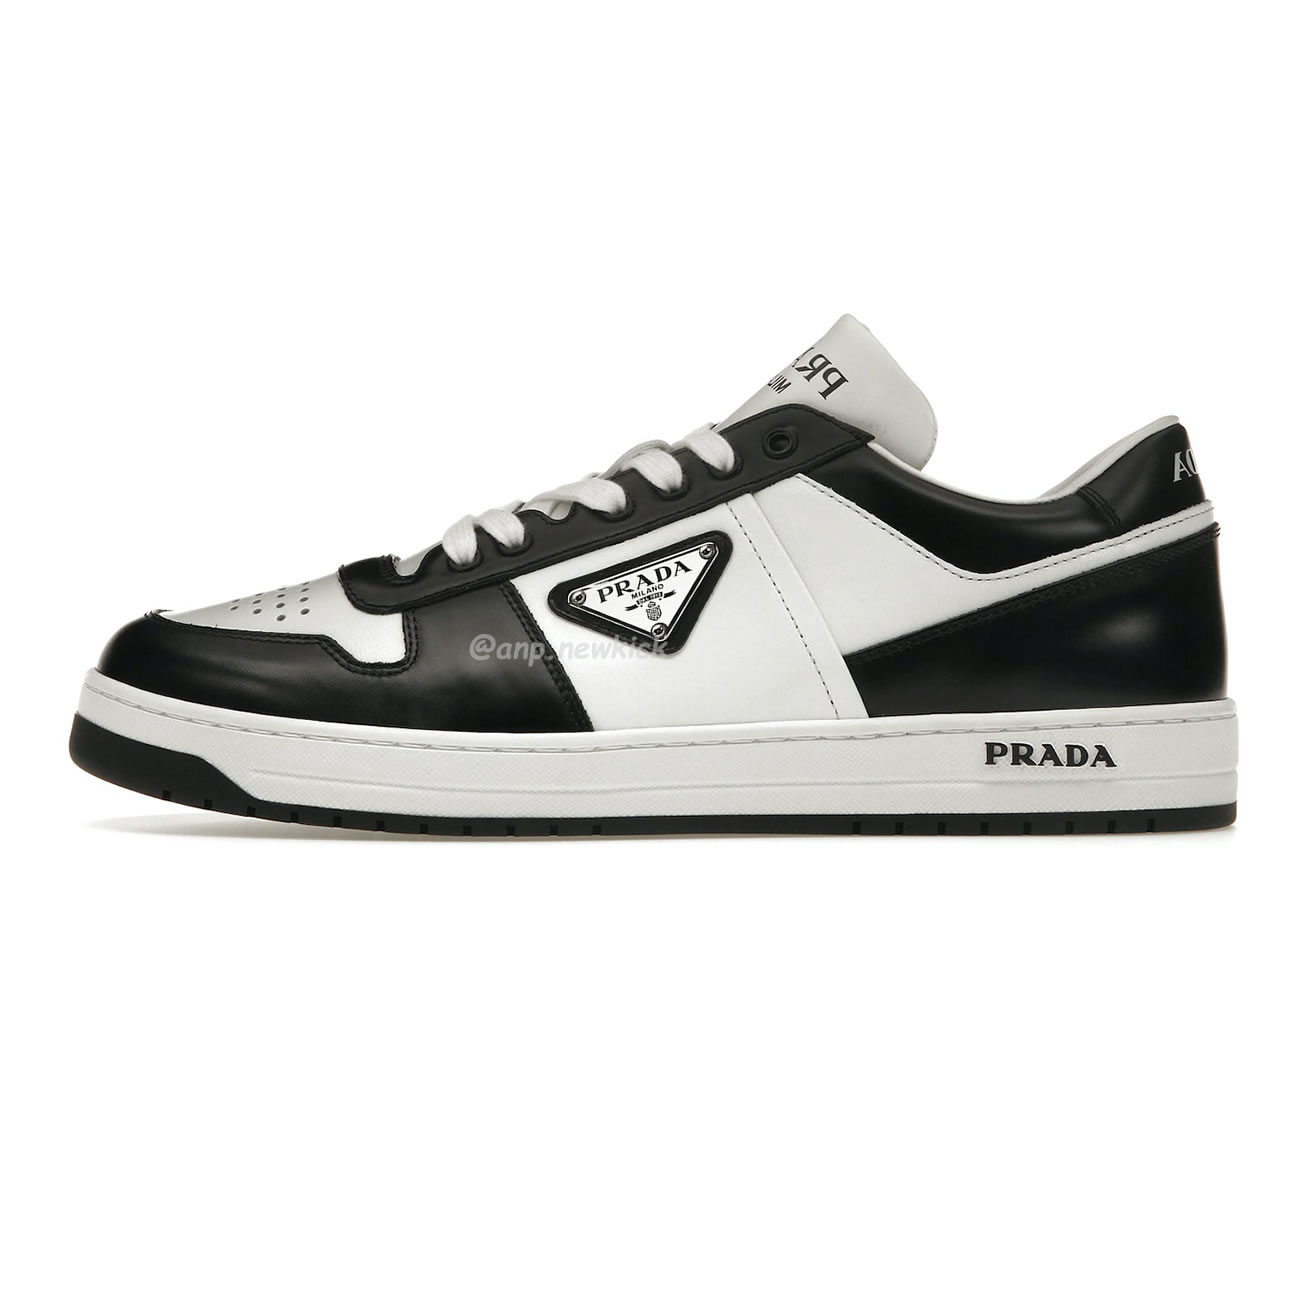 Prada Downtown Low Top Sneakers Leather White Black 2ee364 3lkg F0964 (1) - newkick.org